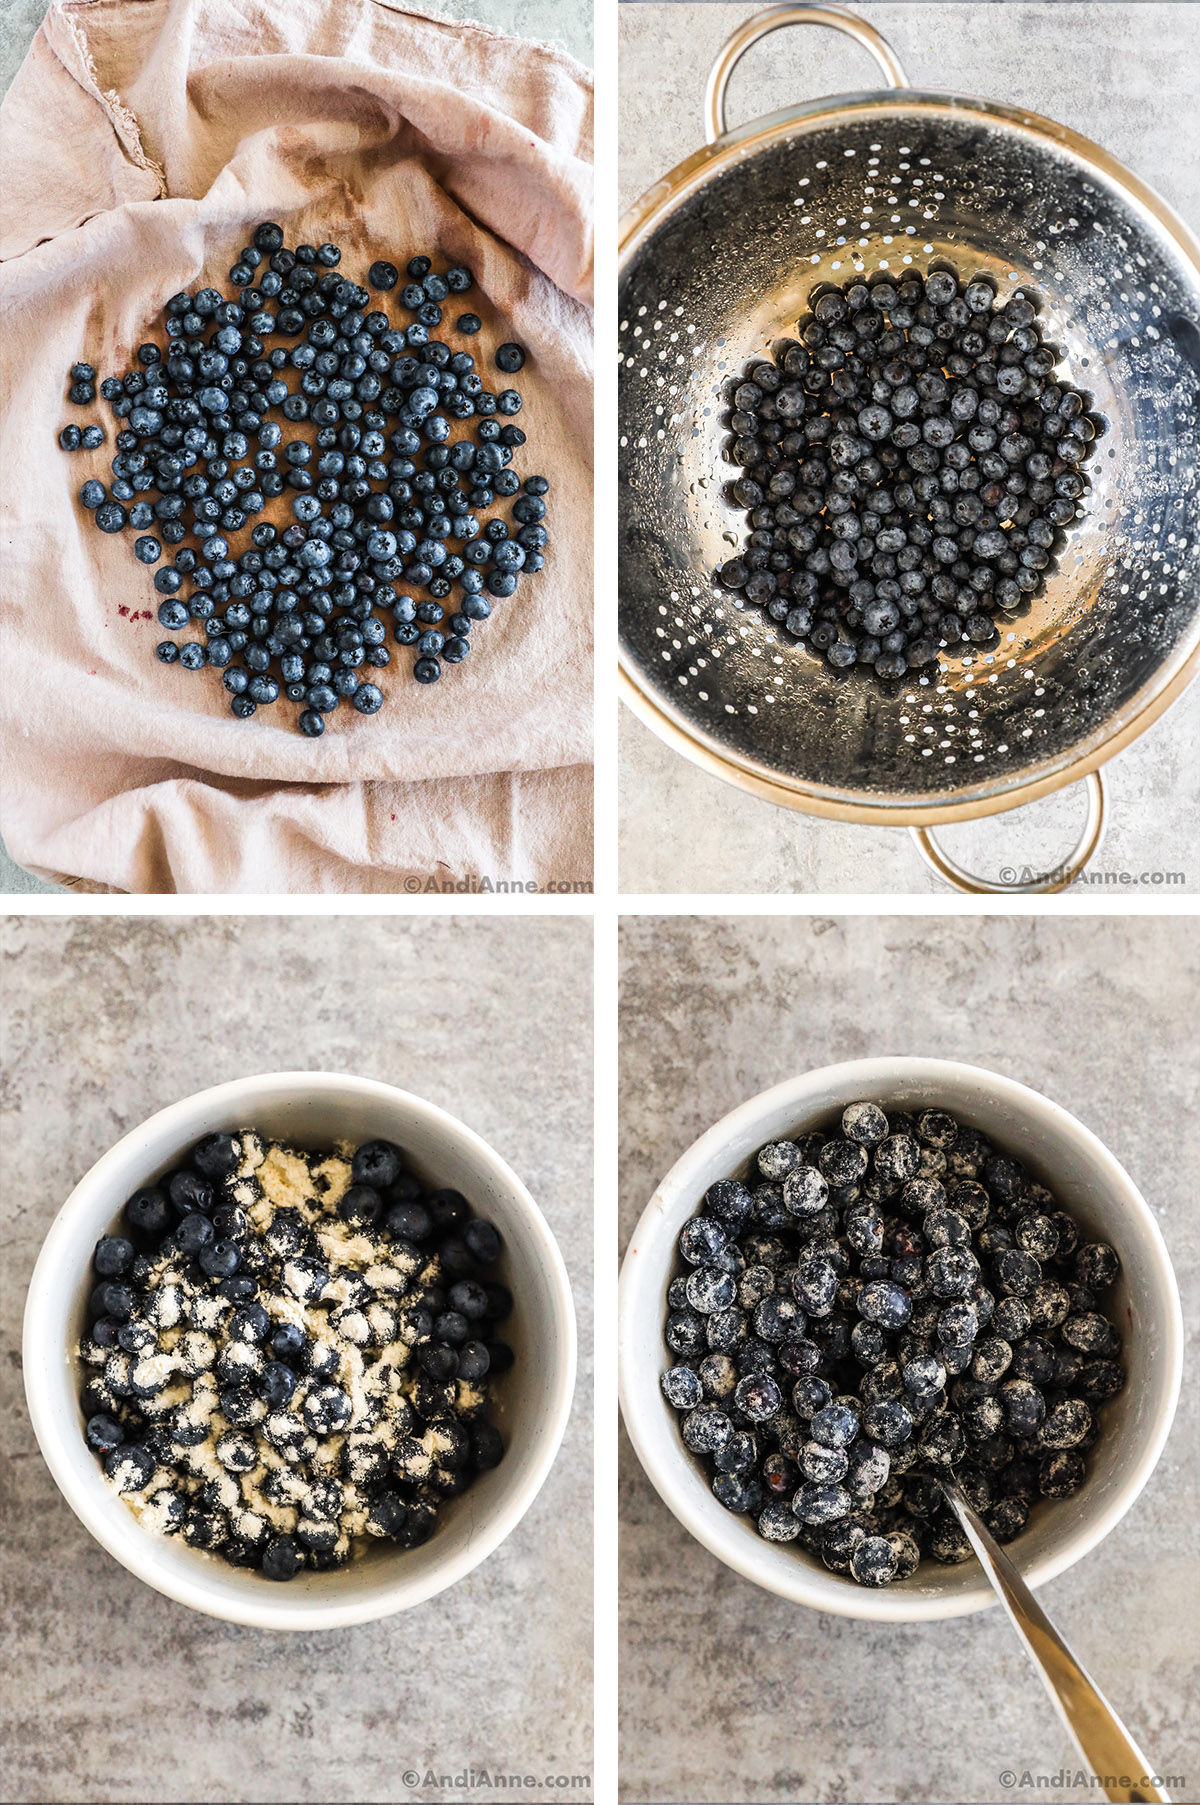 Four images together. First is blueberries on a towel, second is blueberries in a strainer, third is blueberries and flour in a bowl, fourth is floured blueberries in a bowl.